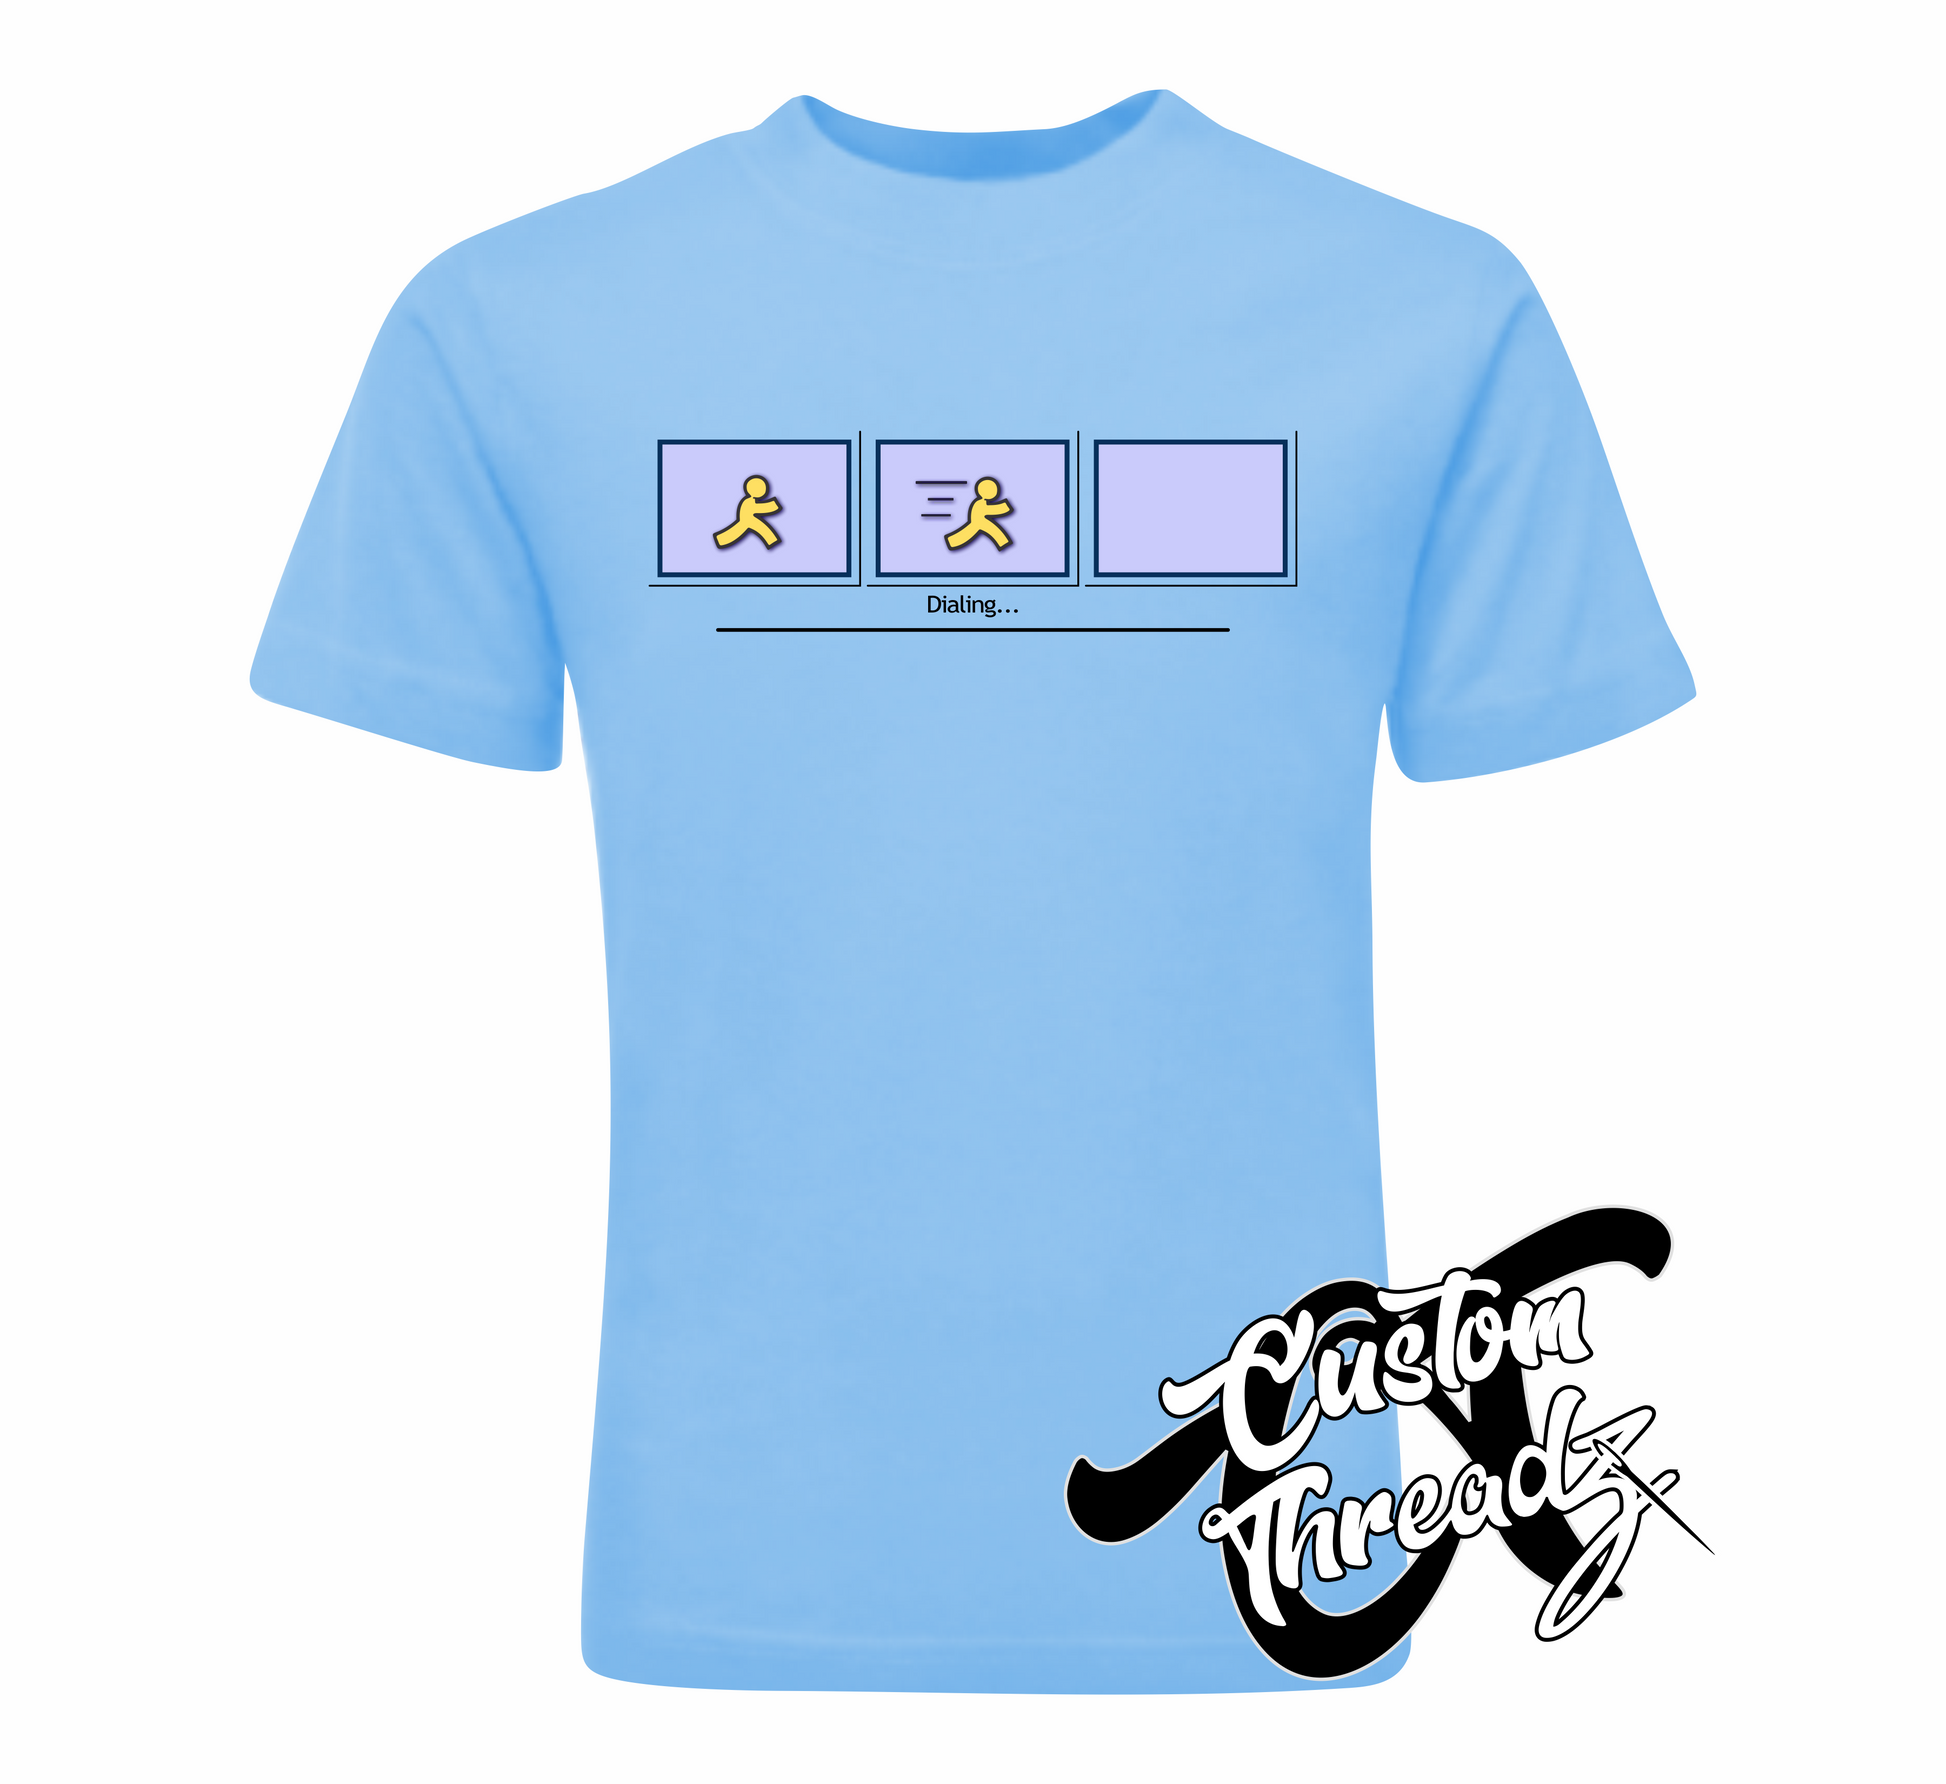 light blue tee with dial up AOL loading DTG printed design